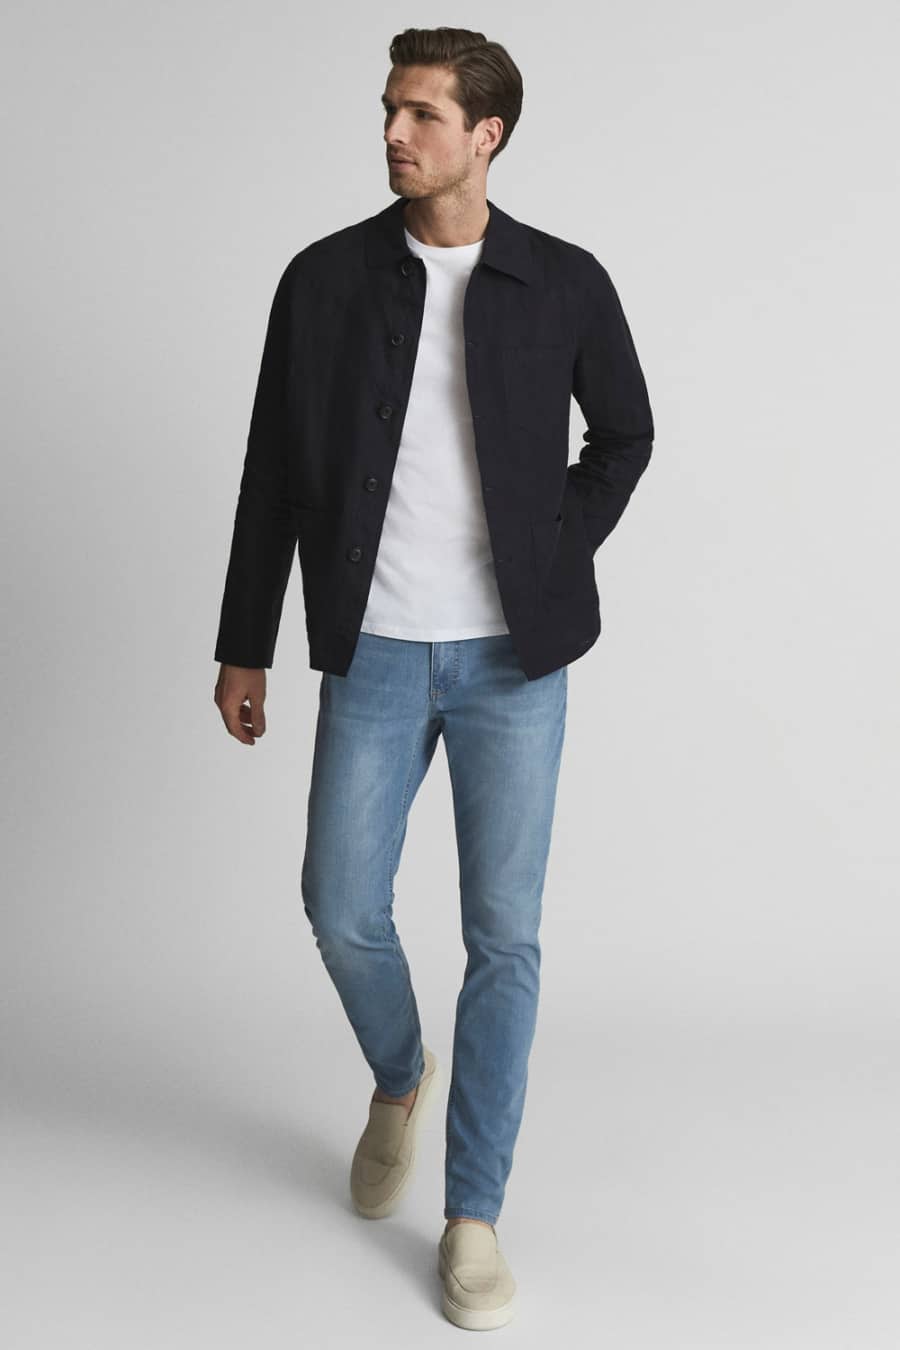 Men's light wash jeans, white T-shirt and navy lightweight jacket with suede loafers outfit